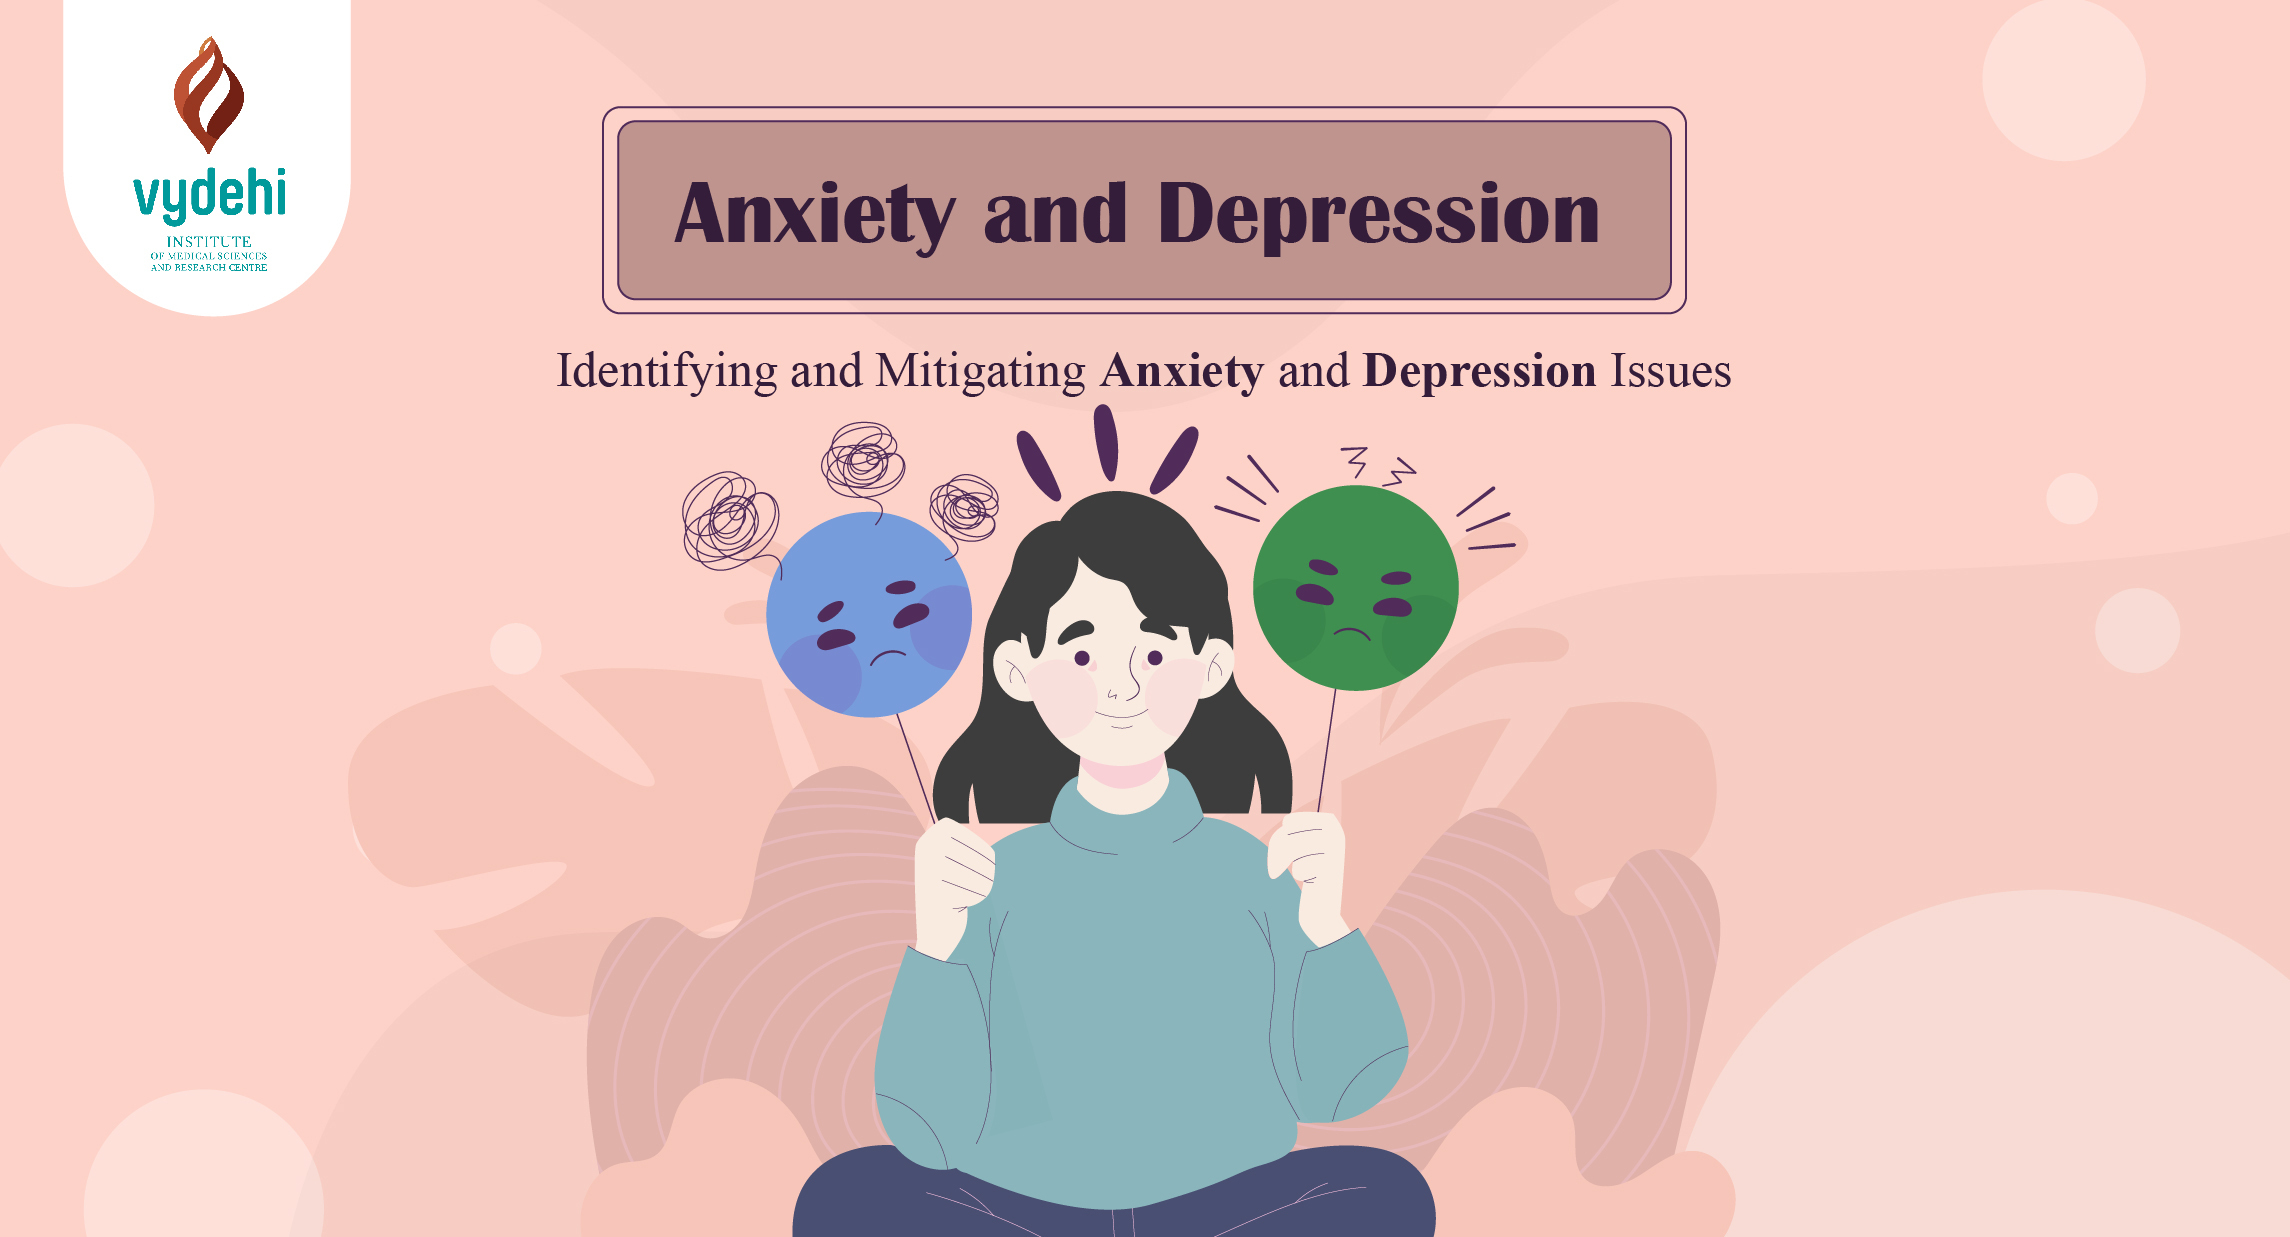 Identifying and Mitigating Anxiety and Depression Issues